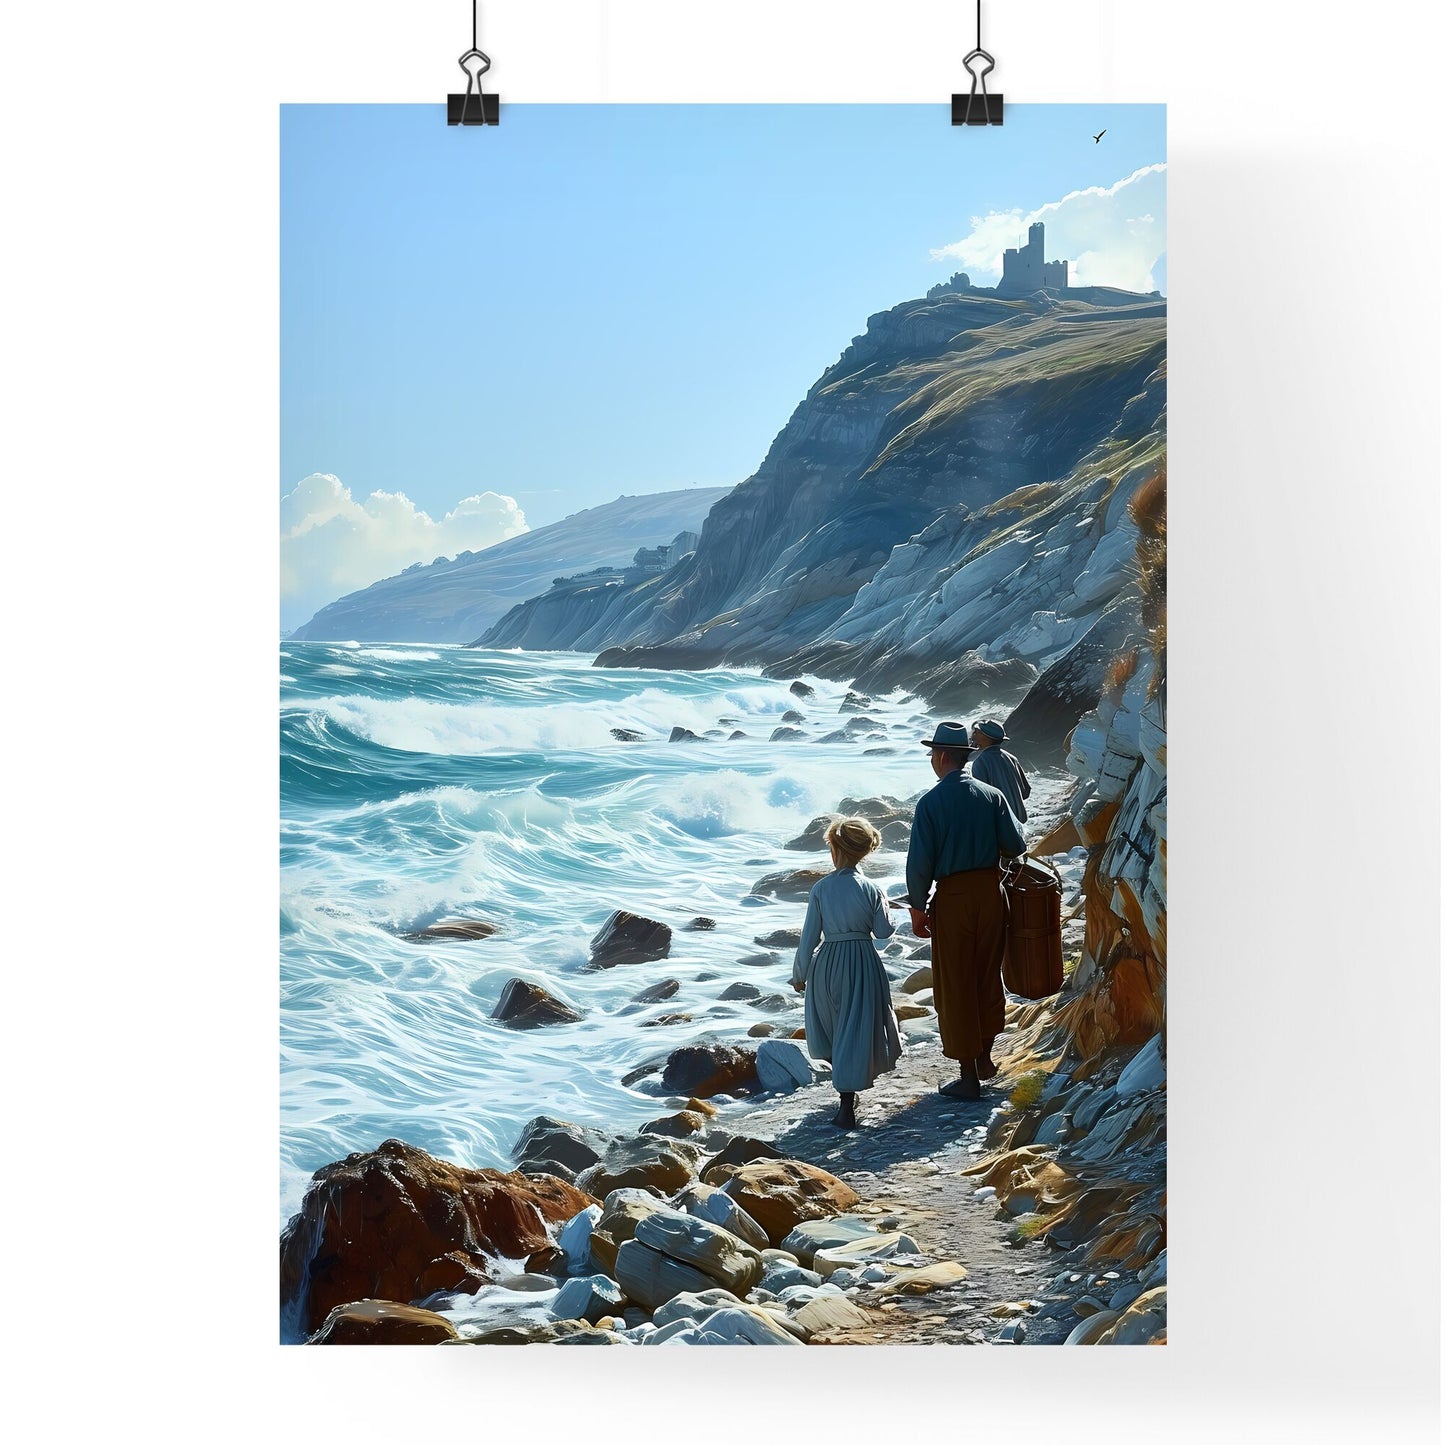 A Poster of bathing scene - A Group Of People Walking On A Rocky Beach Default Title